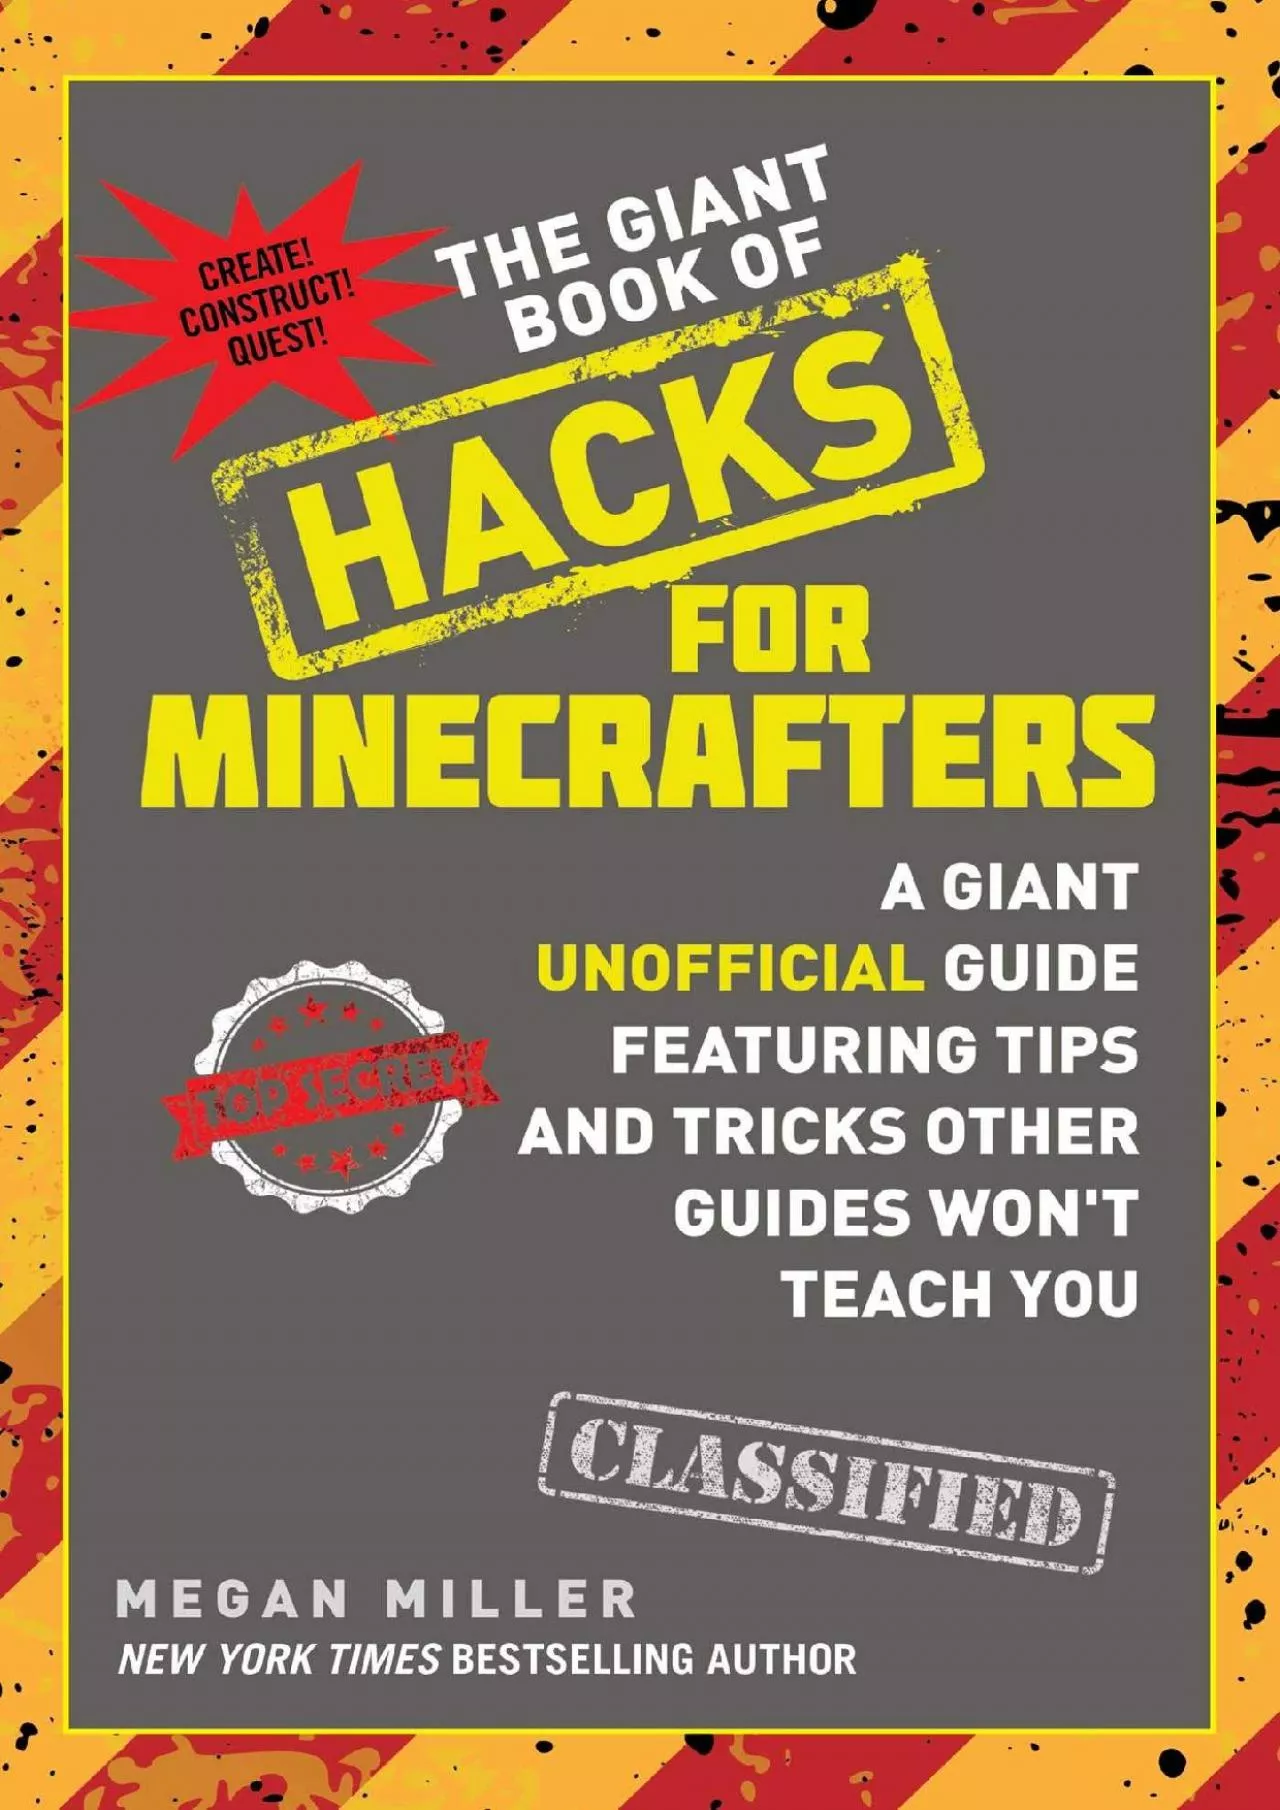 (BOOK)-The Giant Book of Hacks for Minecrafters: A Giant Unofficial Guide Featuring Tips